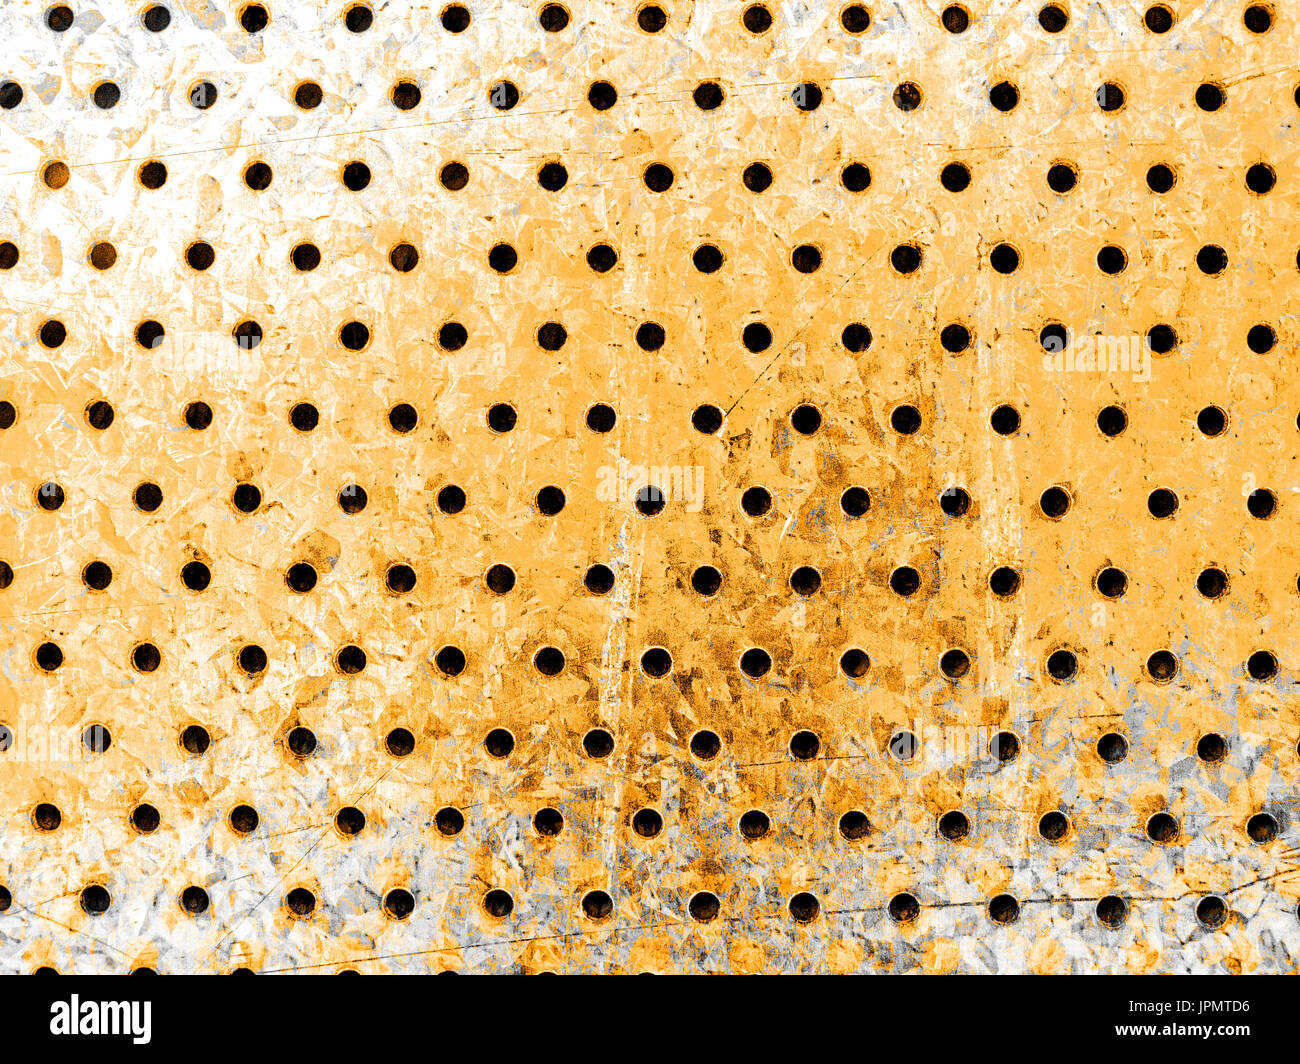 Alloy panel in a colourful grunge texture. Stock Photo